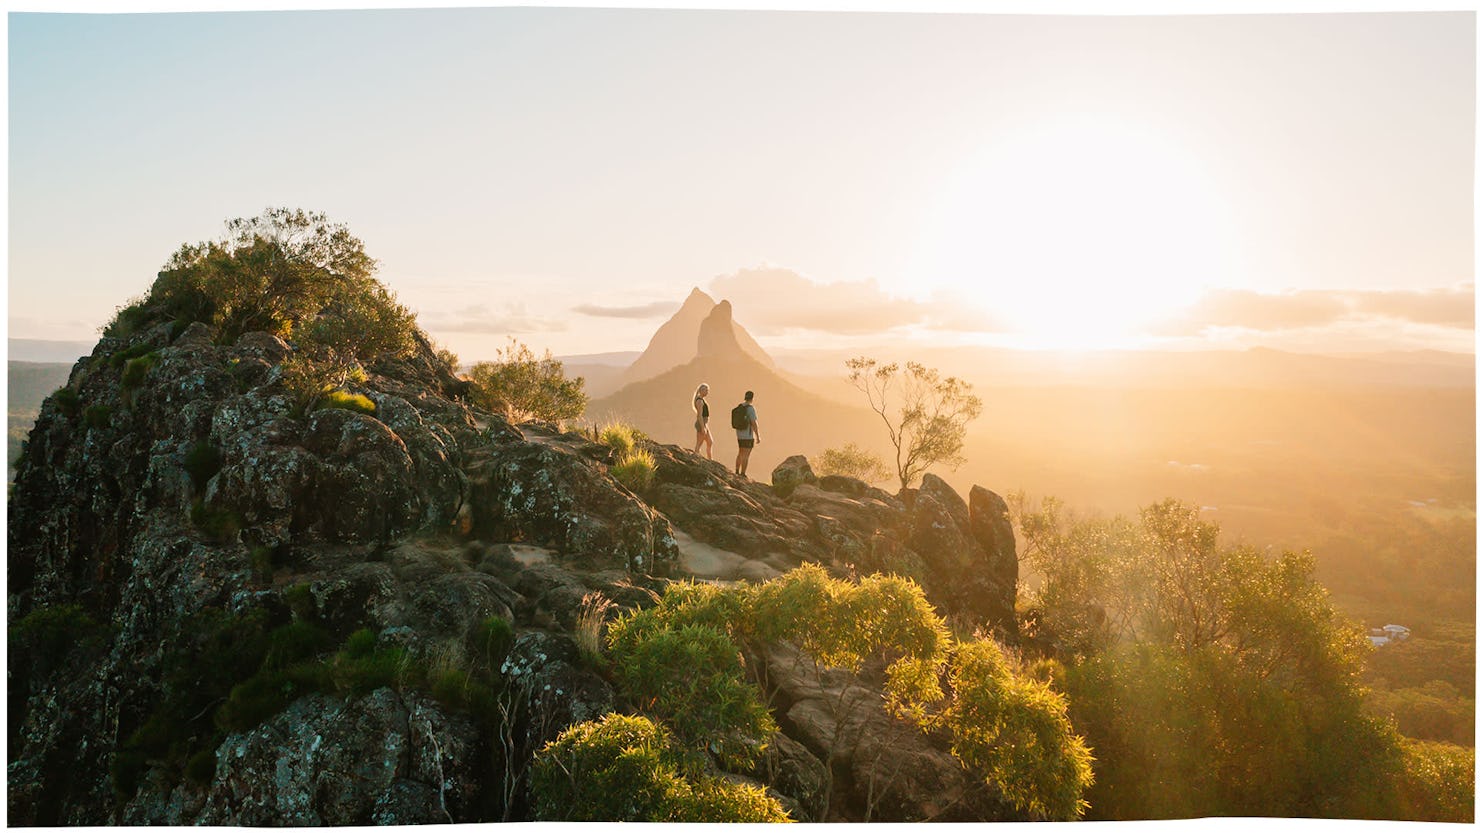 48 Hours in the Glass House Mountains